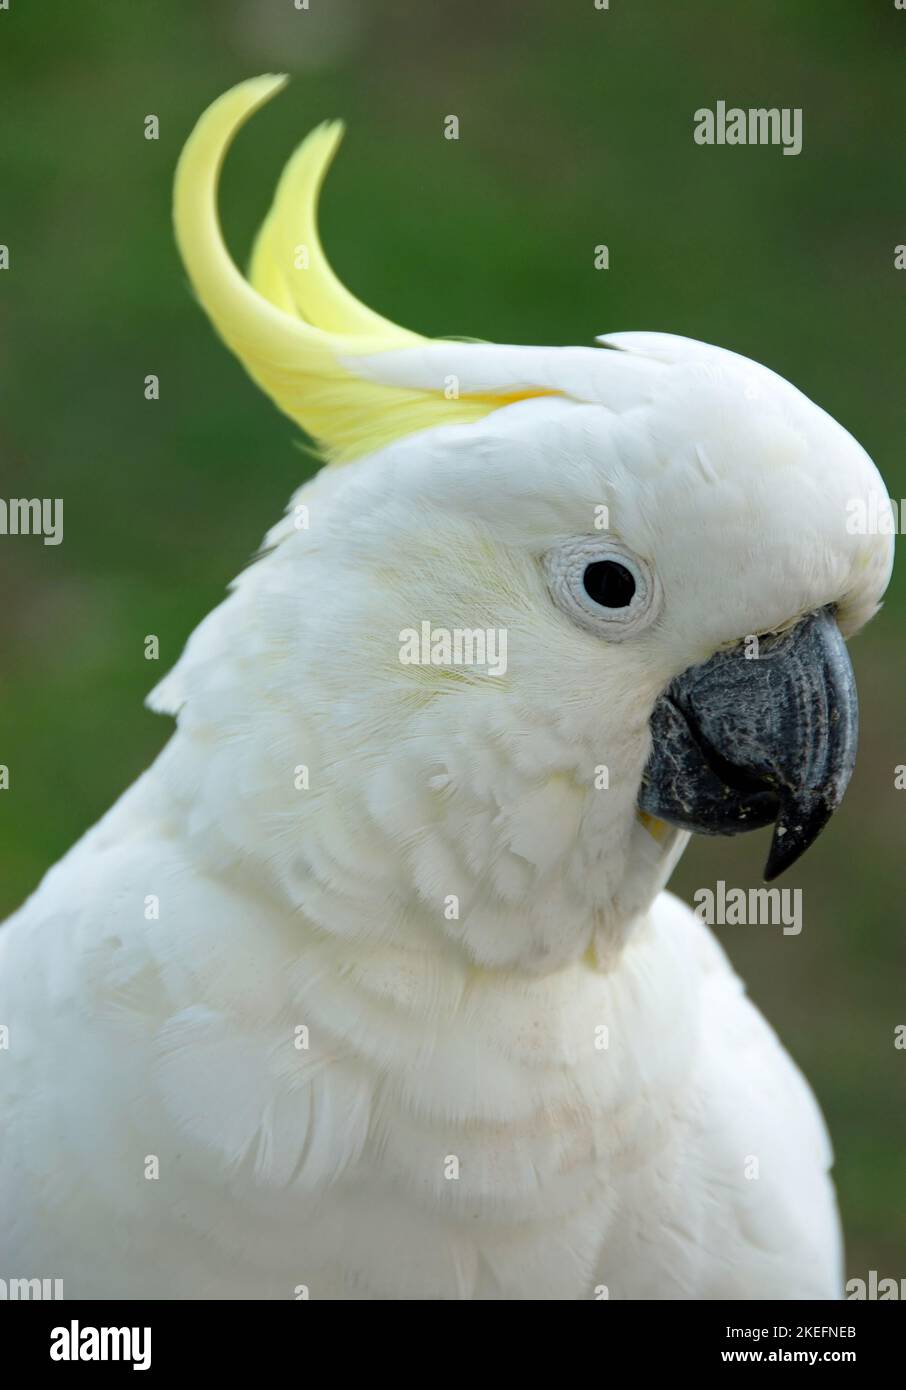 Sulphur-crested cockatoos with close up of head. Australian birds with white plumage and yellow crest. Sulphur-crested cockatoo (cacatua galerita). Stock Photo